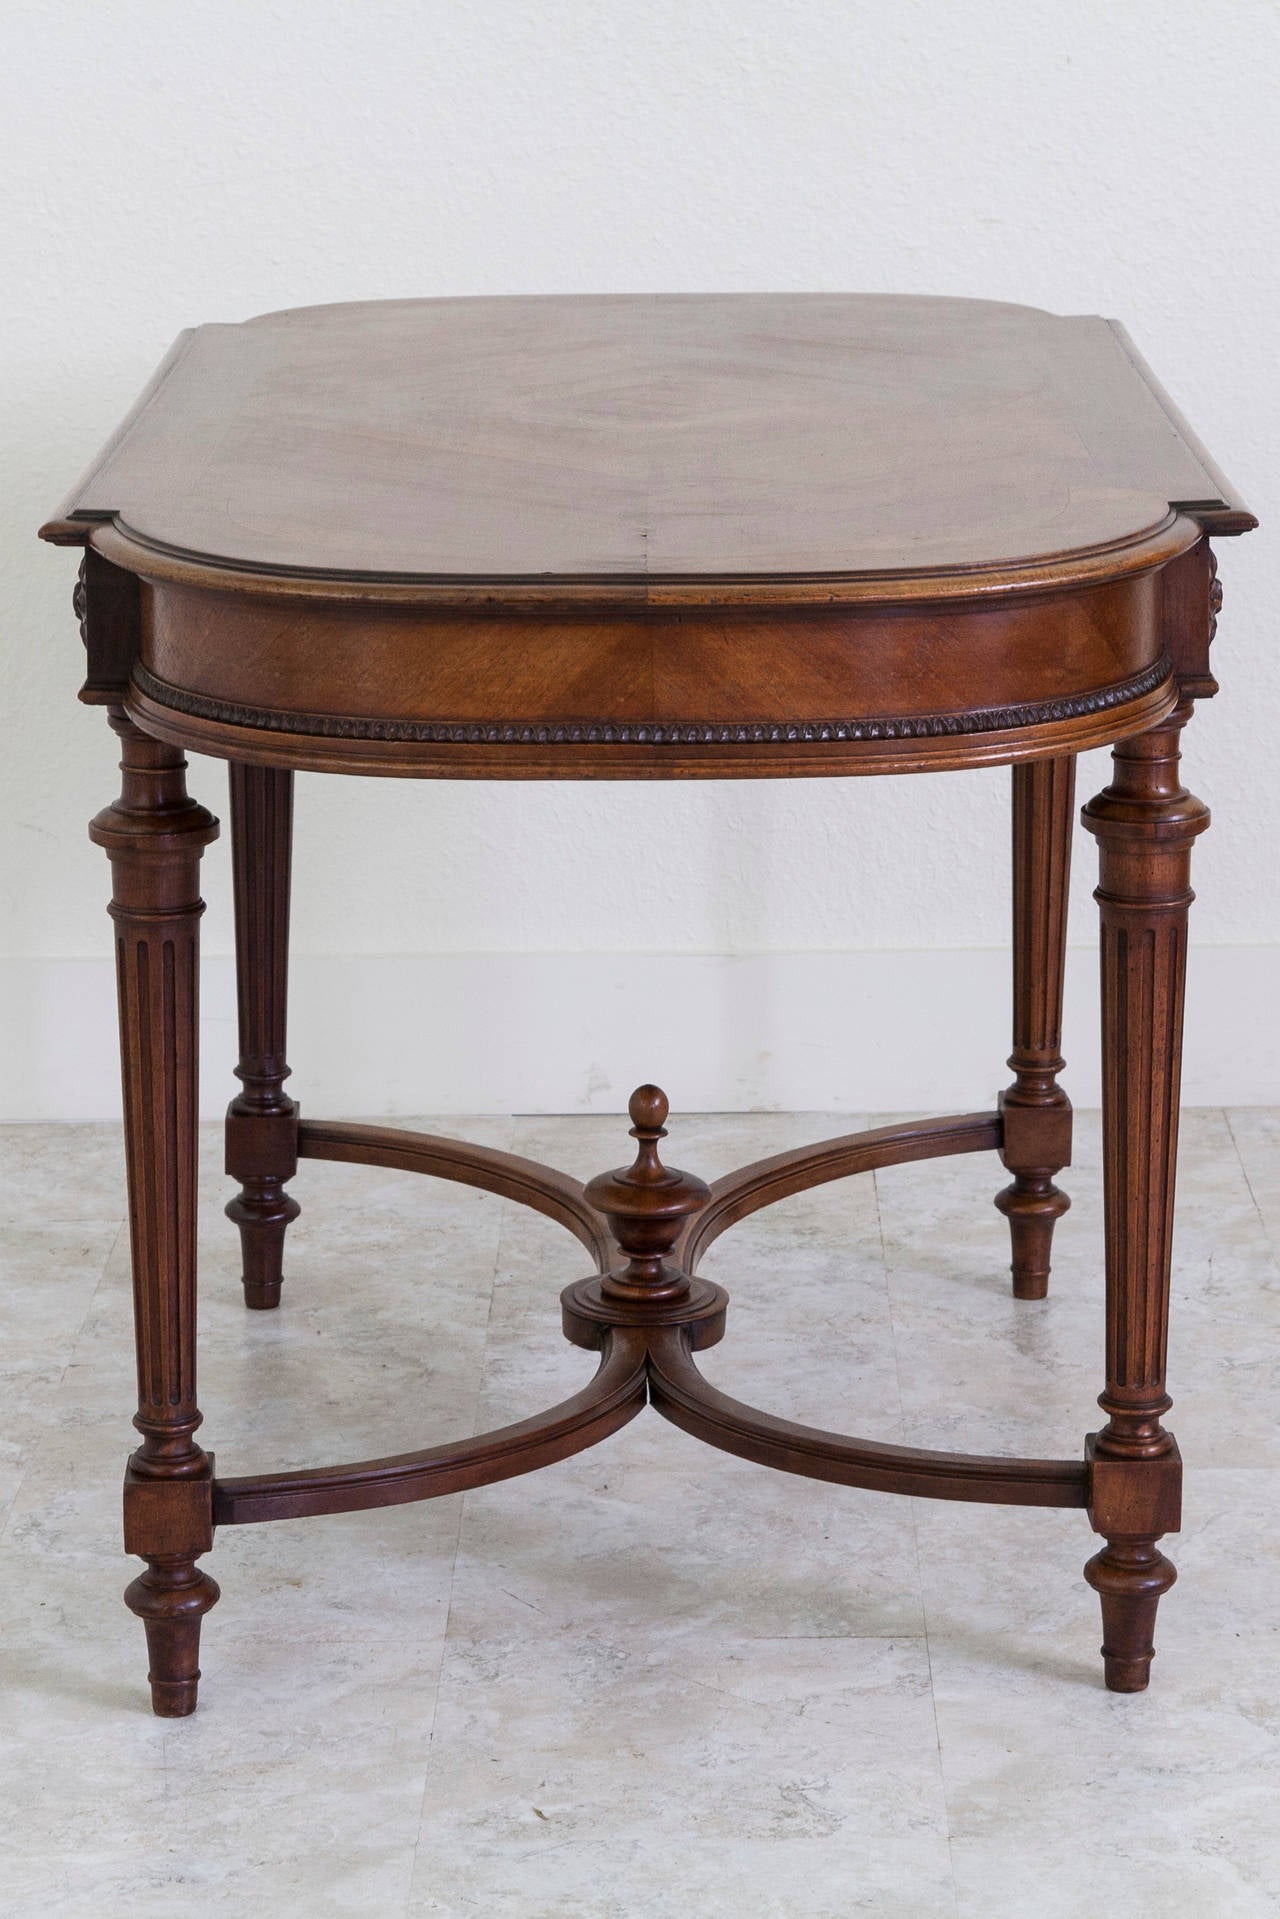 An elegant geometric diamond pattern created from bookmatched walnut gives the top of this desk great interest. Its simple carved apron allows the walnut wood grain to shine, and features a single wide hidden drawer. Rosettes on each side lead to